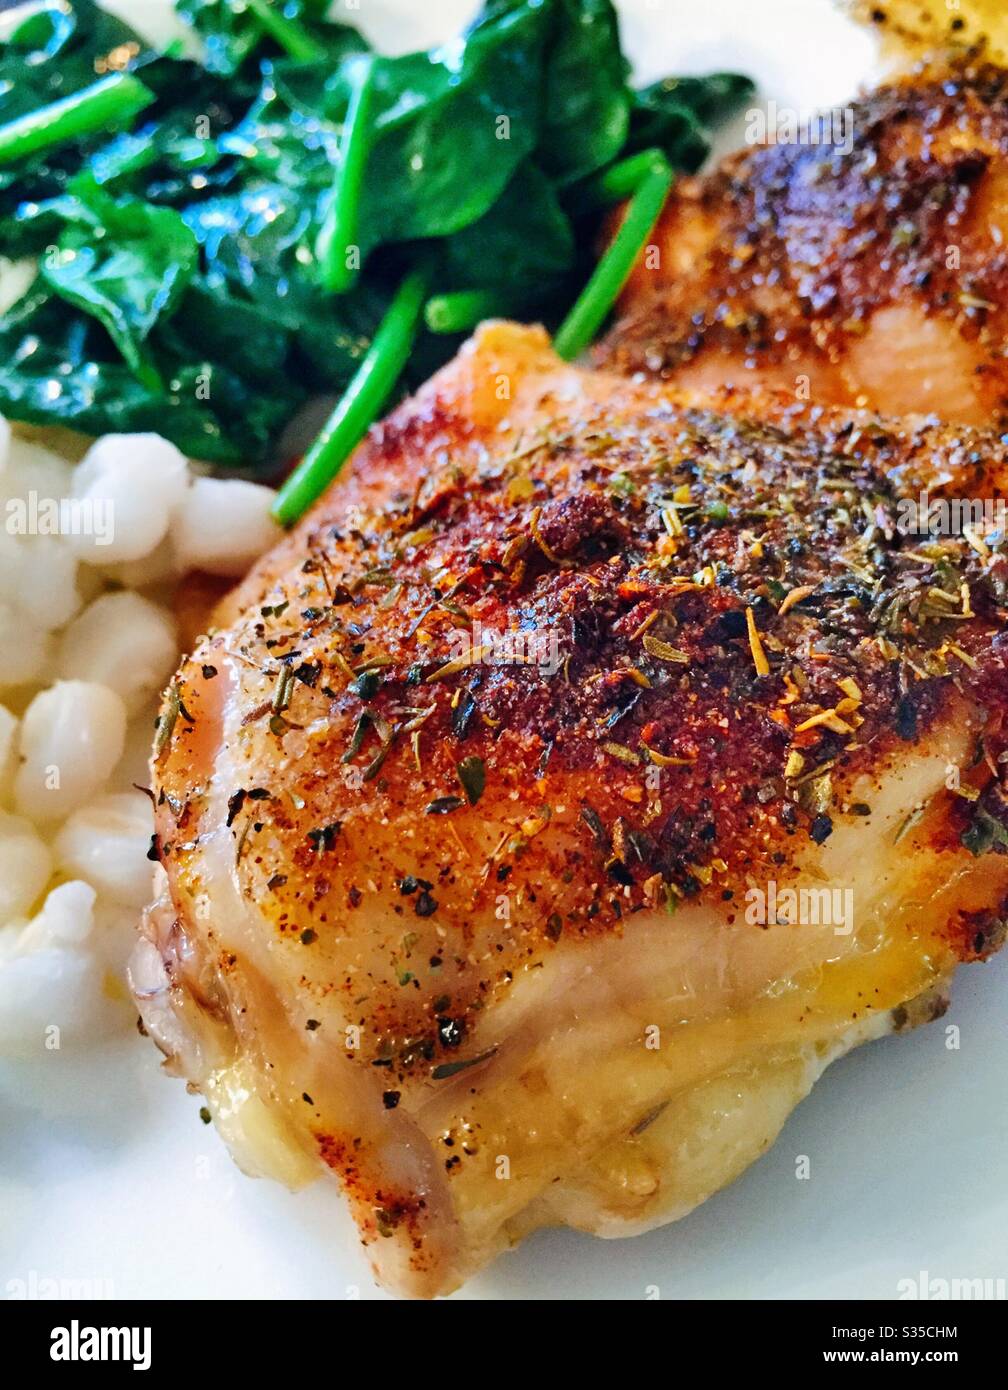 Close up of a balanced meal of baked chicken thighs sautéed spinach and hominy grits Stock Photo